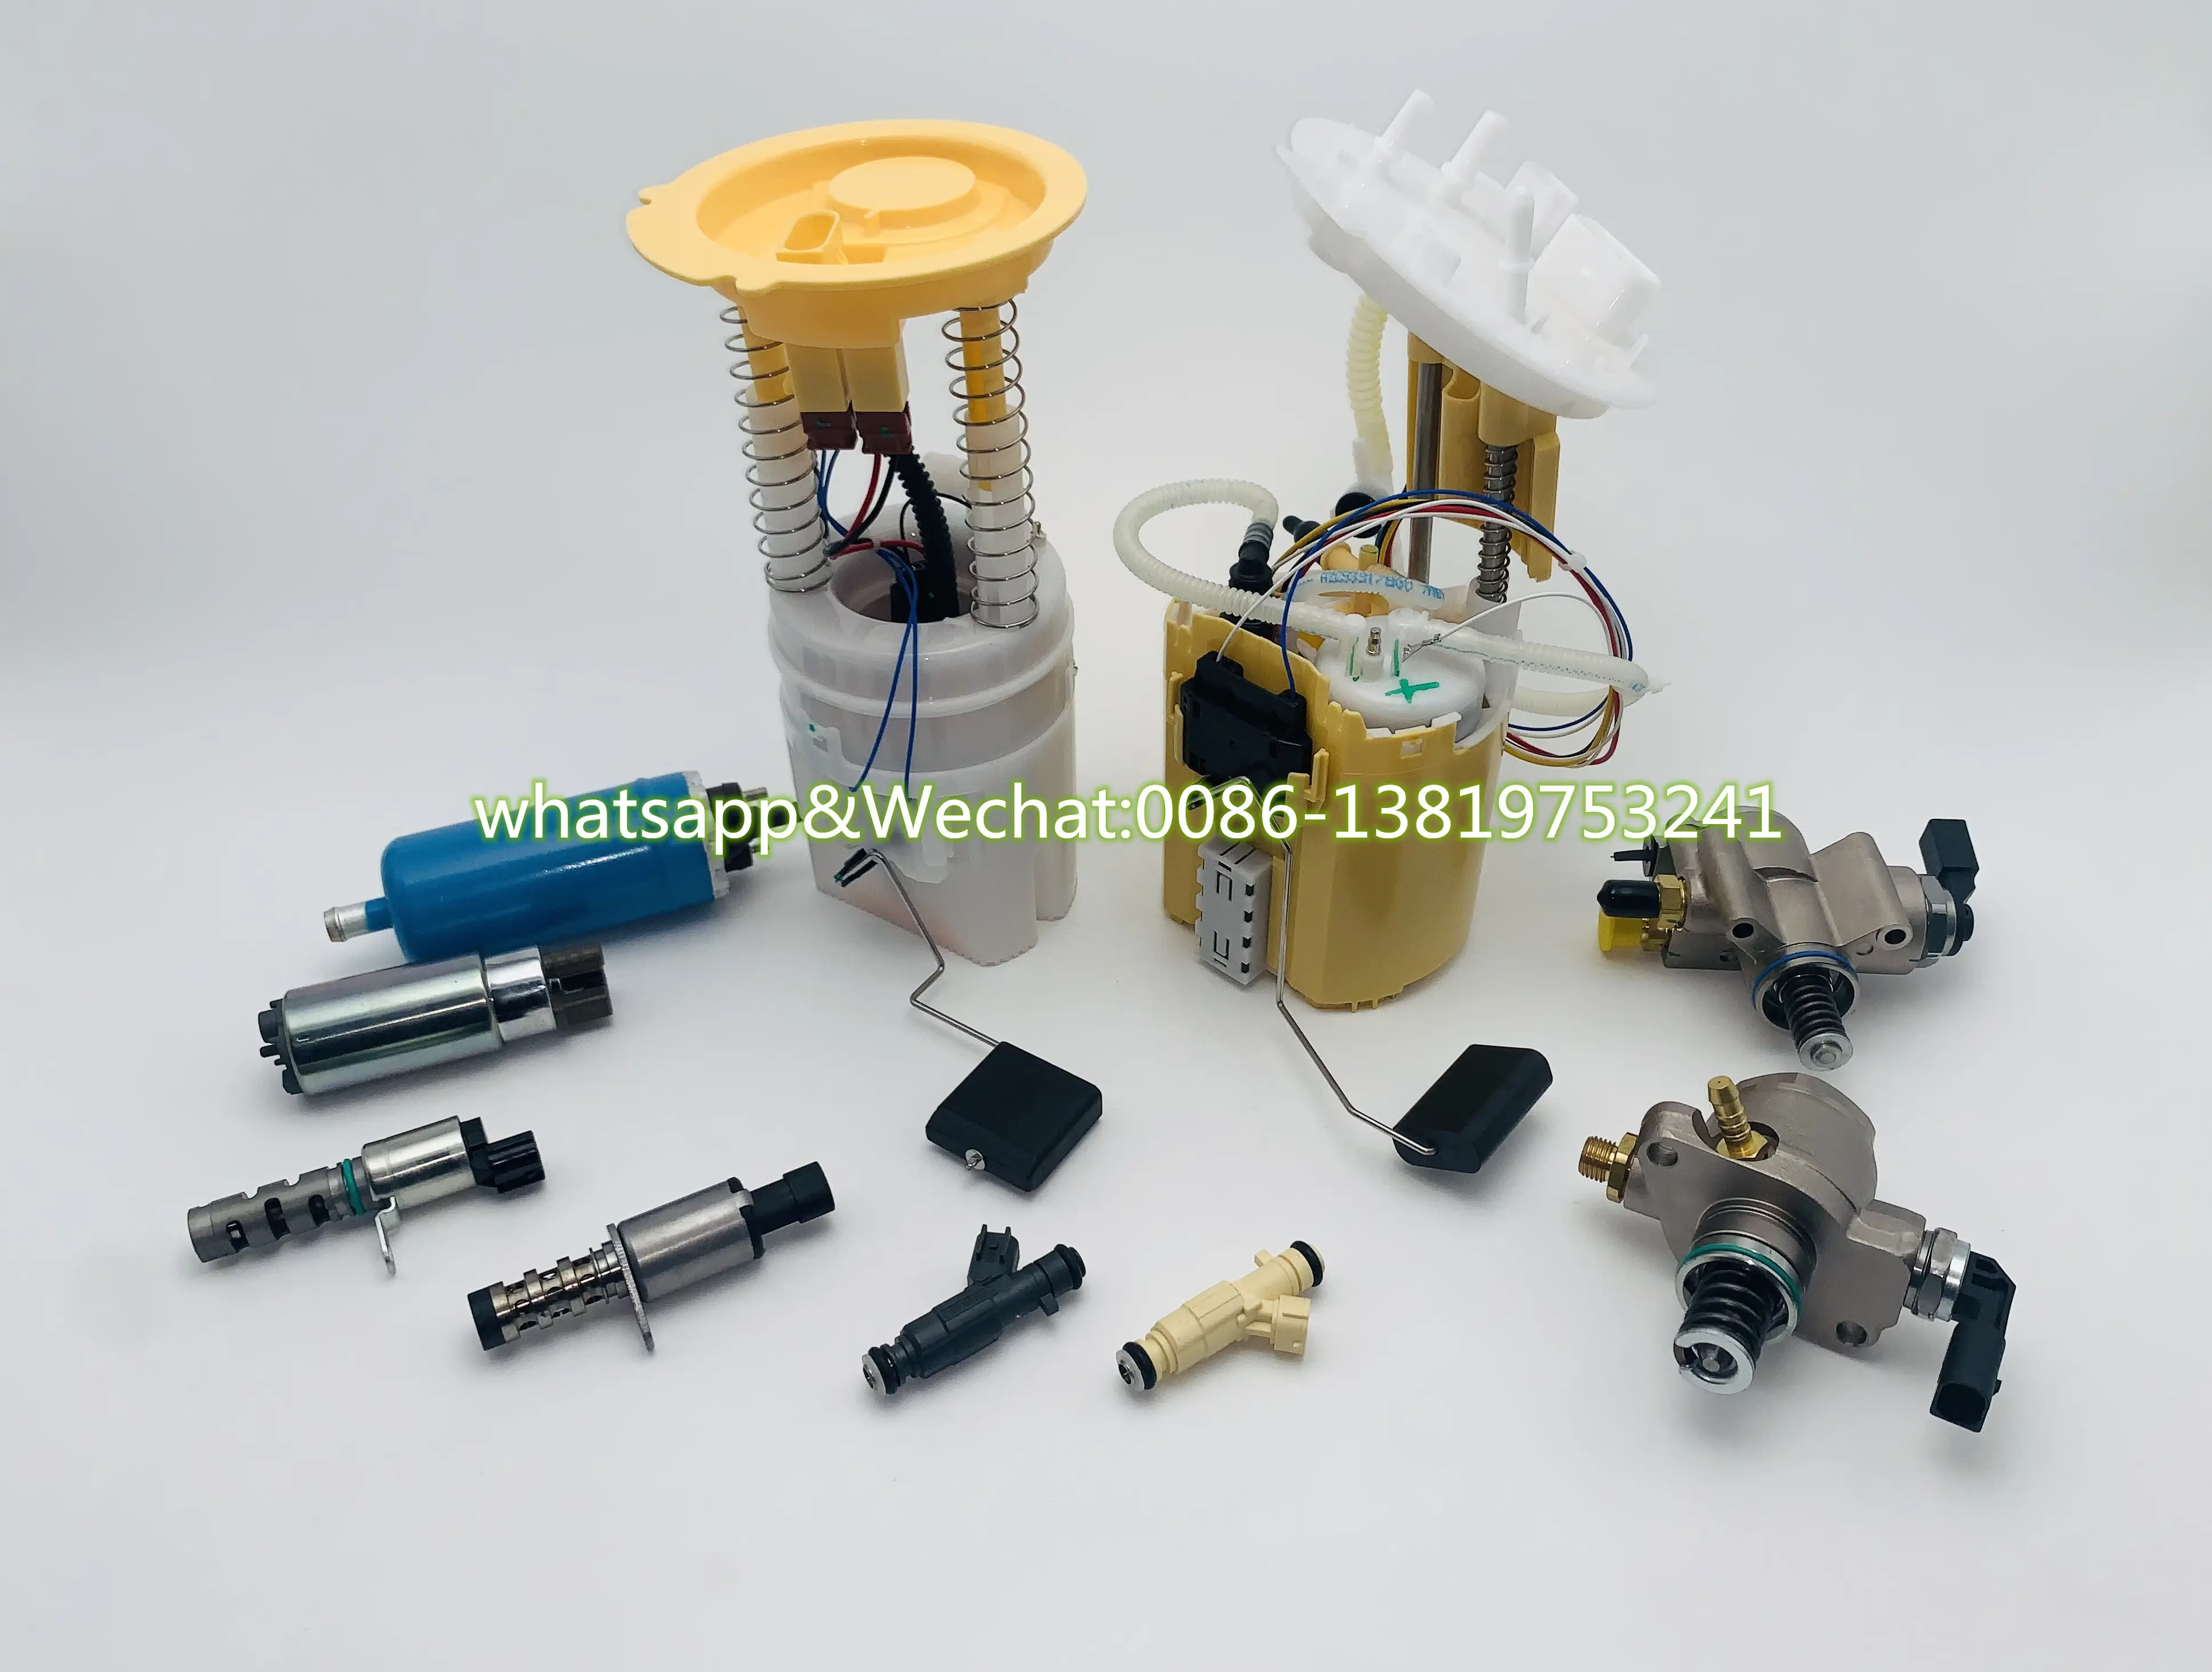 KS - a1130 High Quality Fuel Pump Assembly for Mercedes Volkswagen 04 - 06 Touareg, Cayenne, Q7